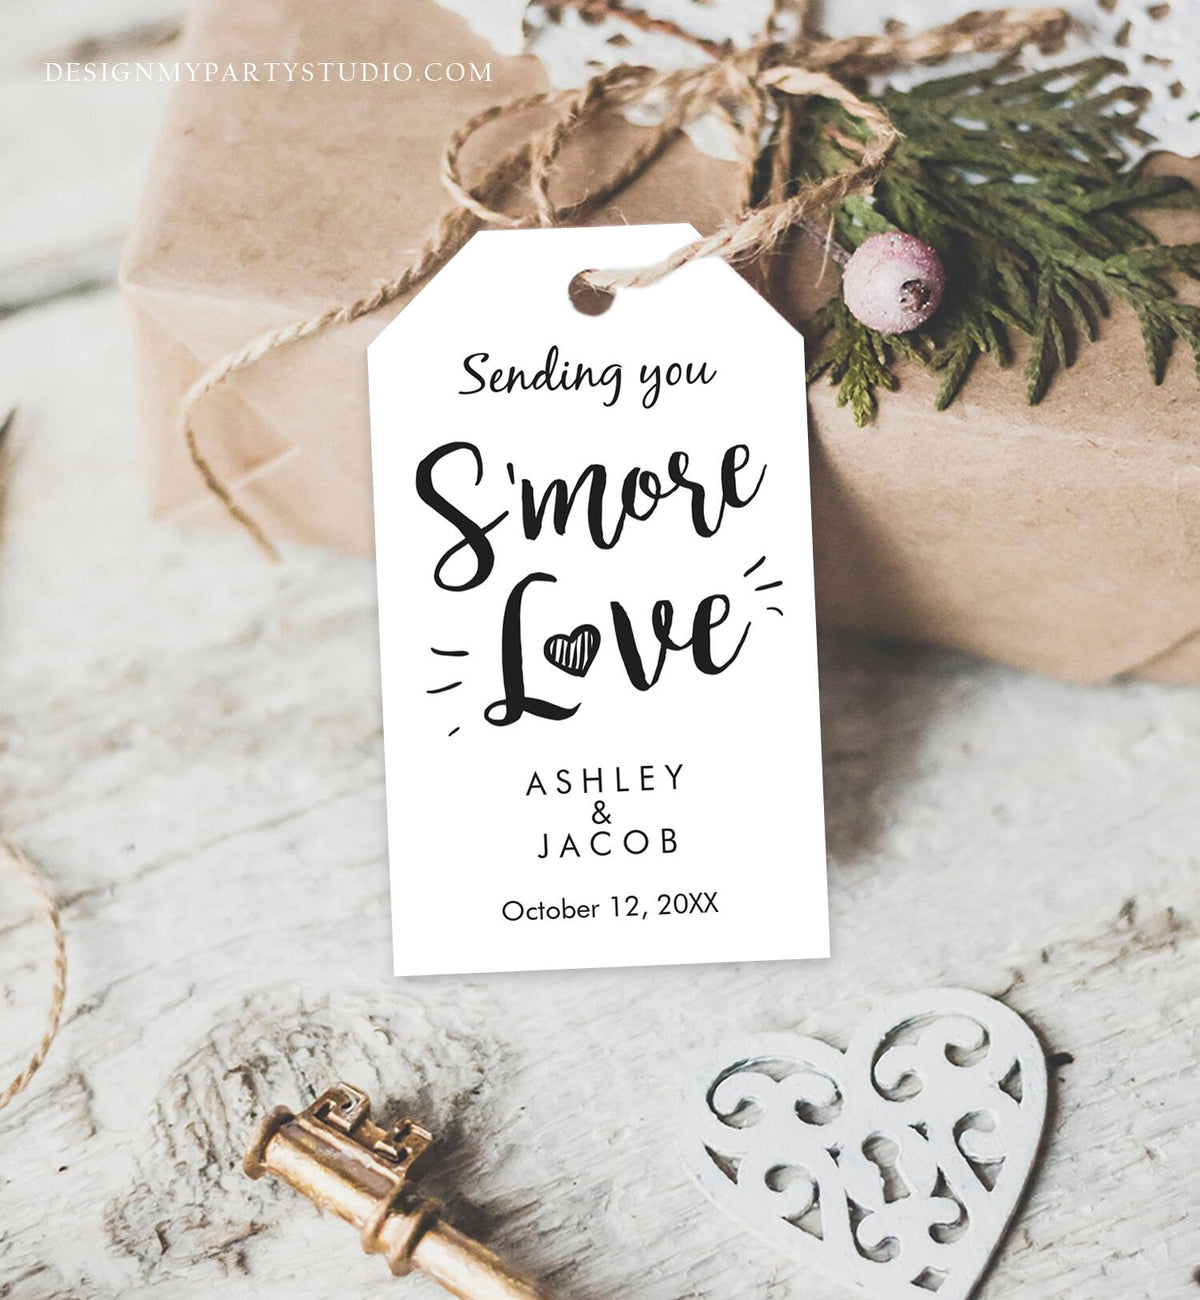 Editable ThanK You tags Rustic Favor Tags Gift Tag Adult Birthday Wedd -  Design My Party Studio